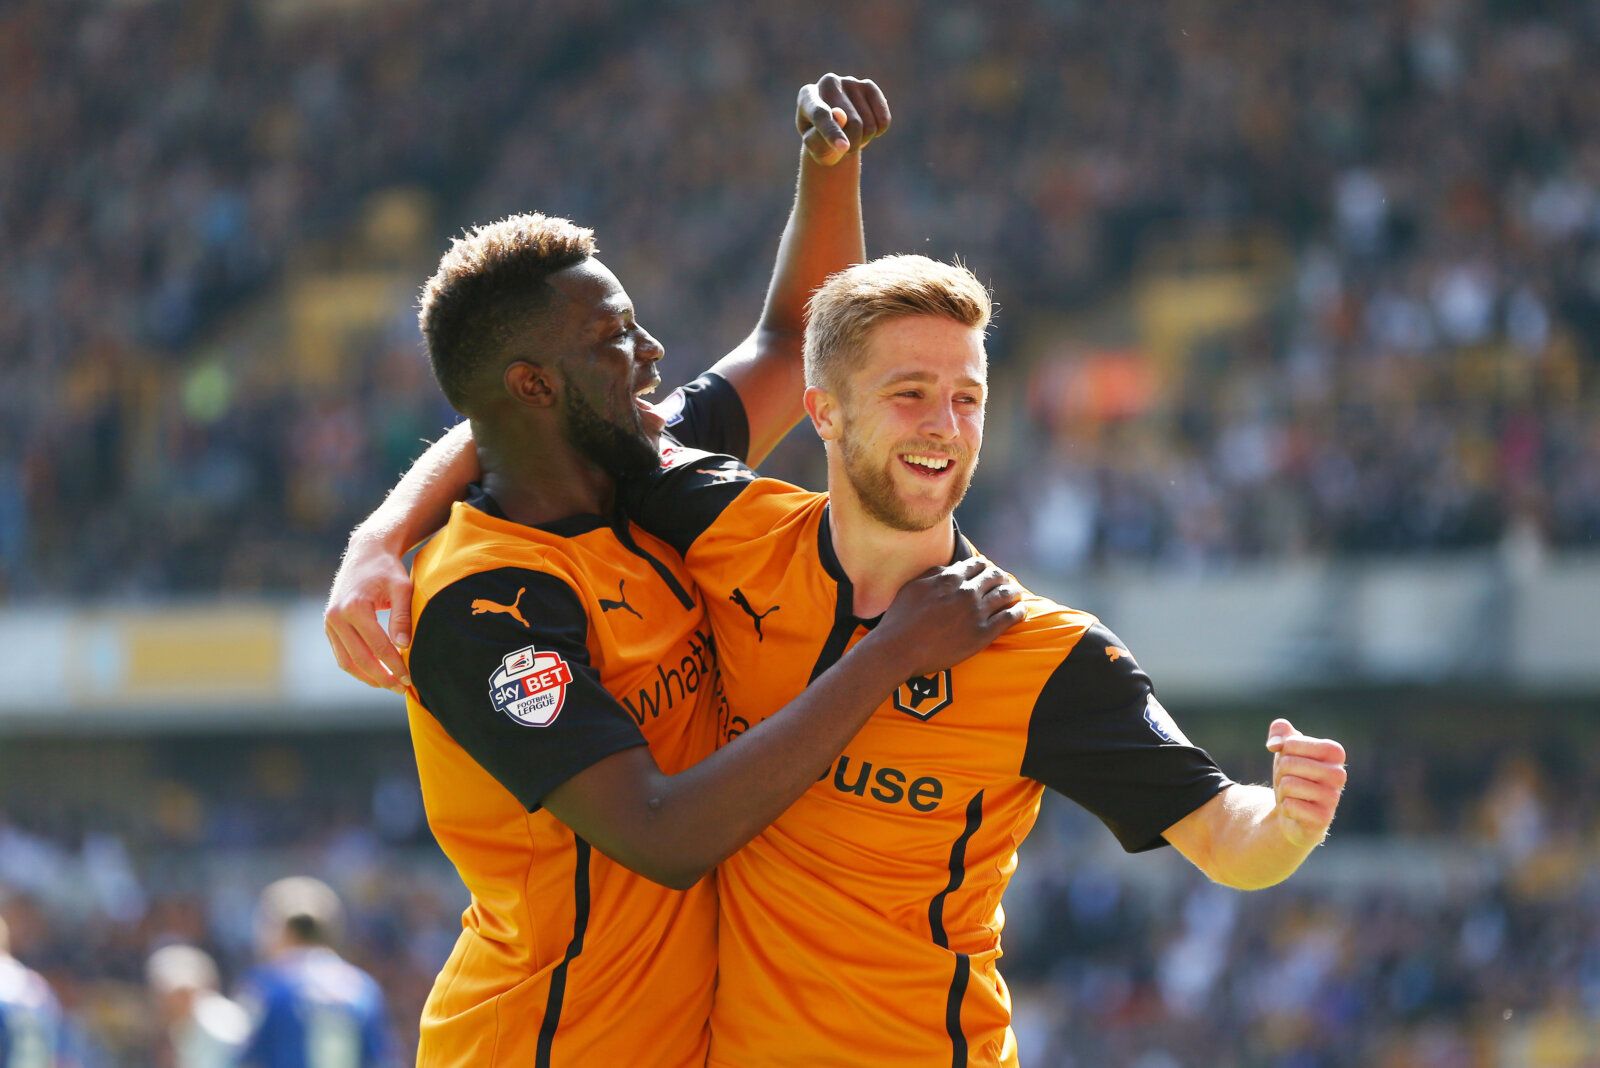 Football - Wolverhampton Wanderers v Carlisle United - Sky Bet Football League One - Molineux - 3/5/14 
Michael Jacobs (R) celebrates with Bakary Sako after scoring the second goal for Wolves 
Mandatory Credit: Action Images / Henry Browne 
Livepic 
EDITORIAL USE ONLY. No use with unauthorized audio, video, data, fixture lists, club/league logos or 